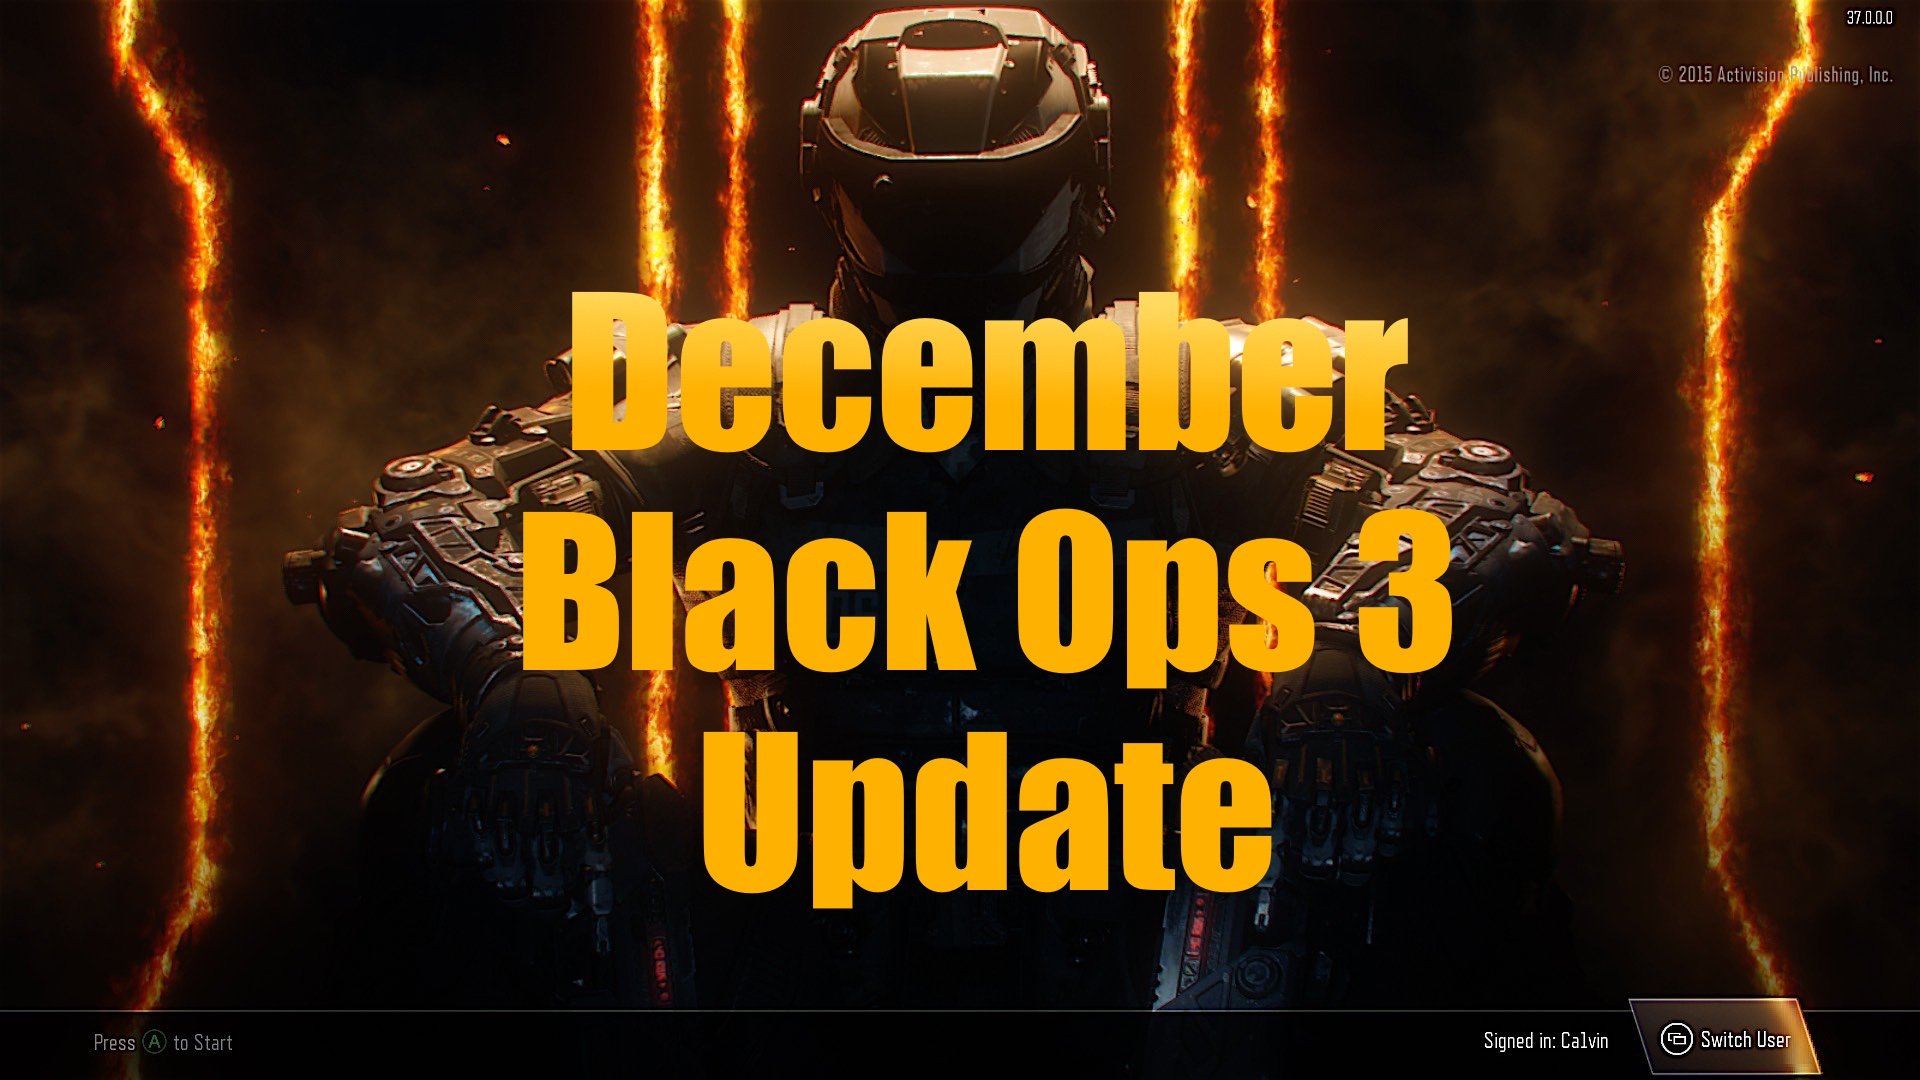 December Black Ops 3 Update 5 Things to Expect & 4 Things Not To